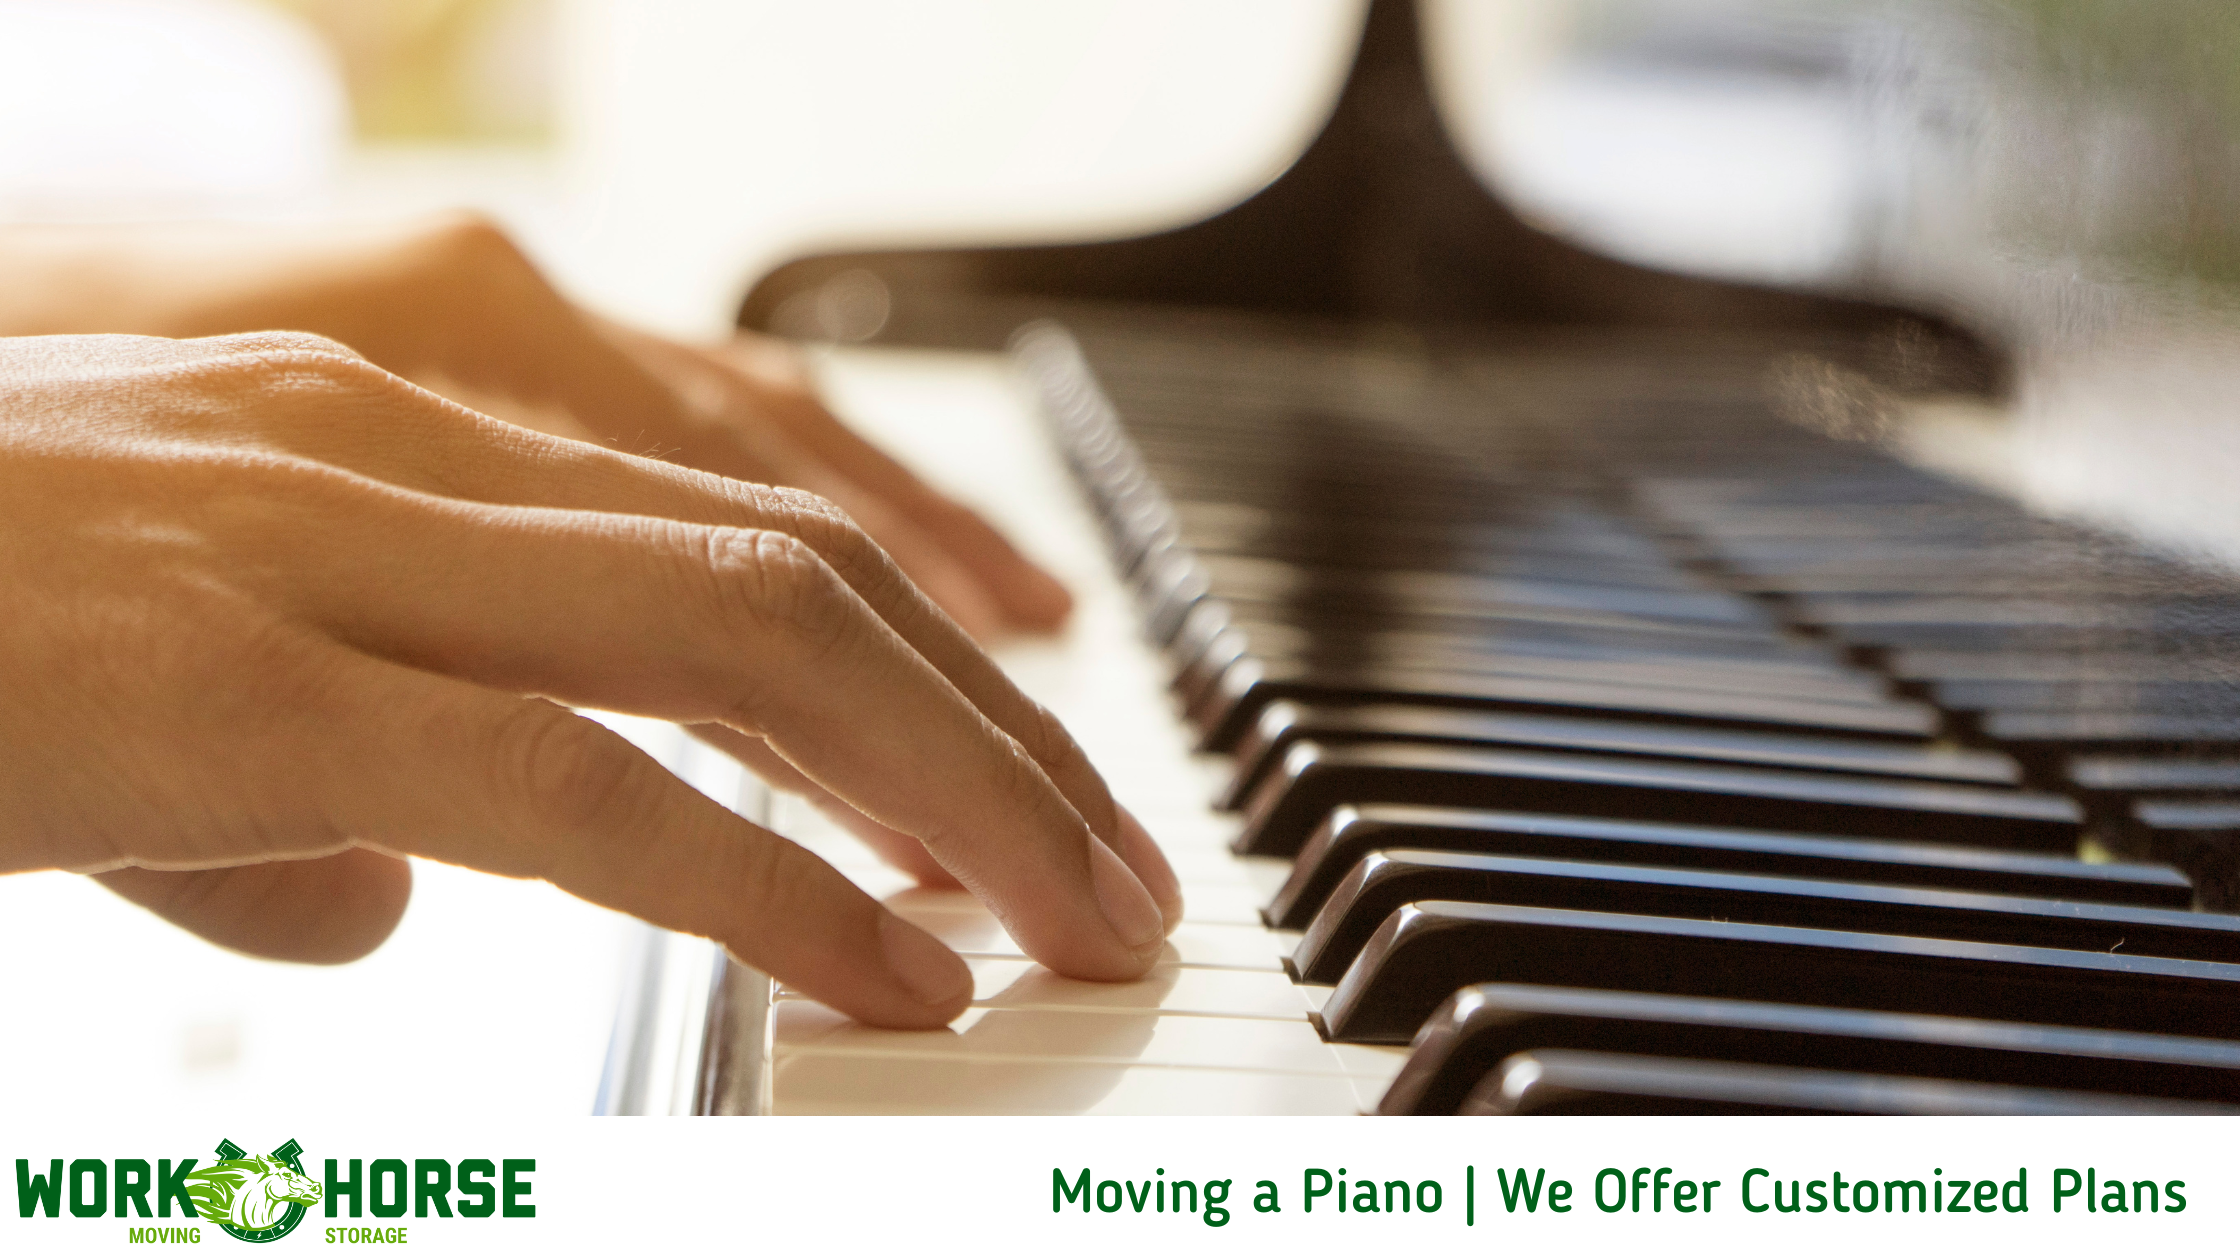 Moving a Piano with Experts from Workhorse Moving and Storage